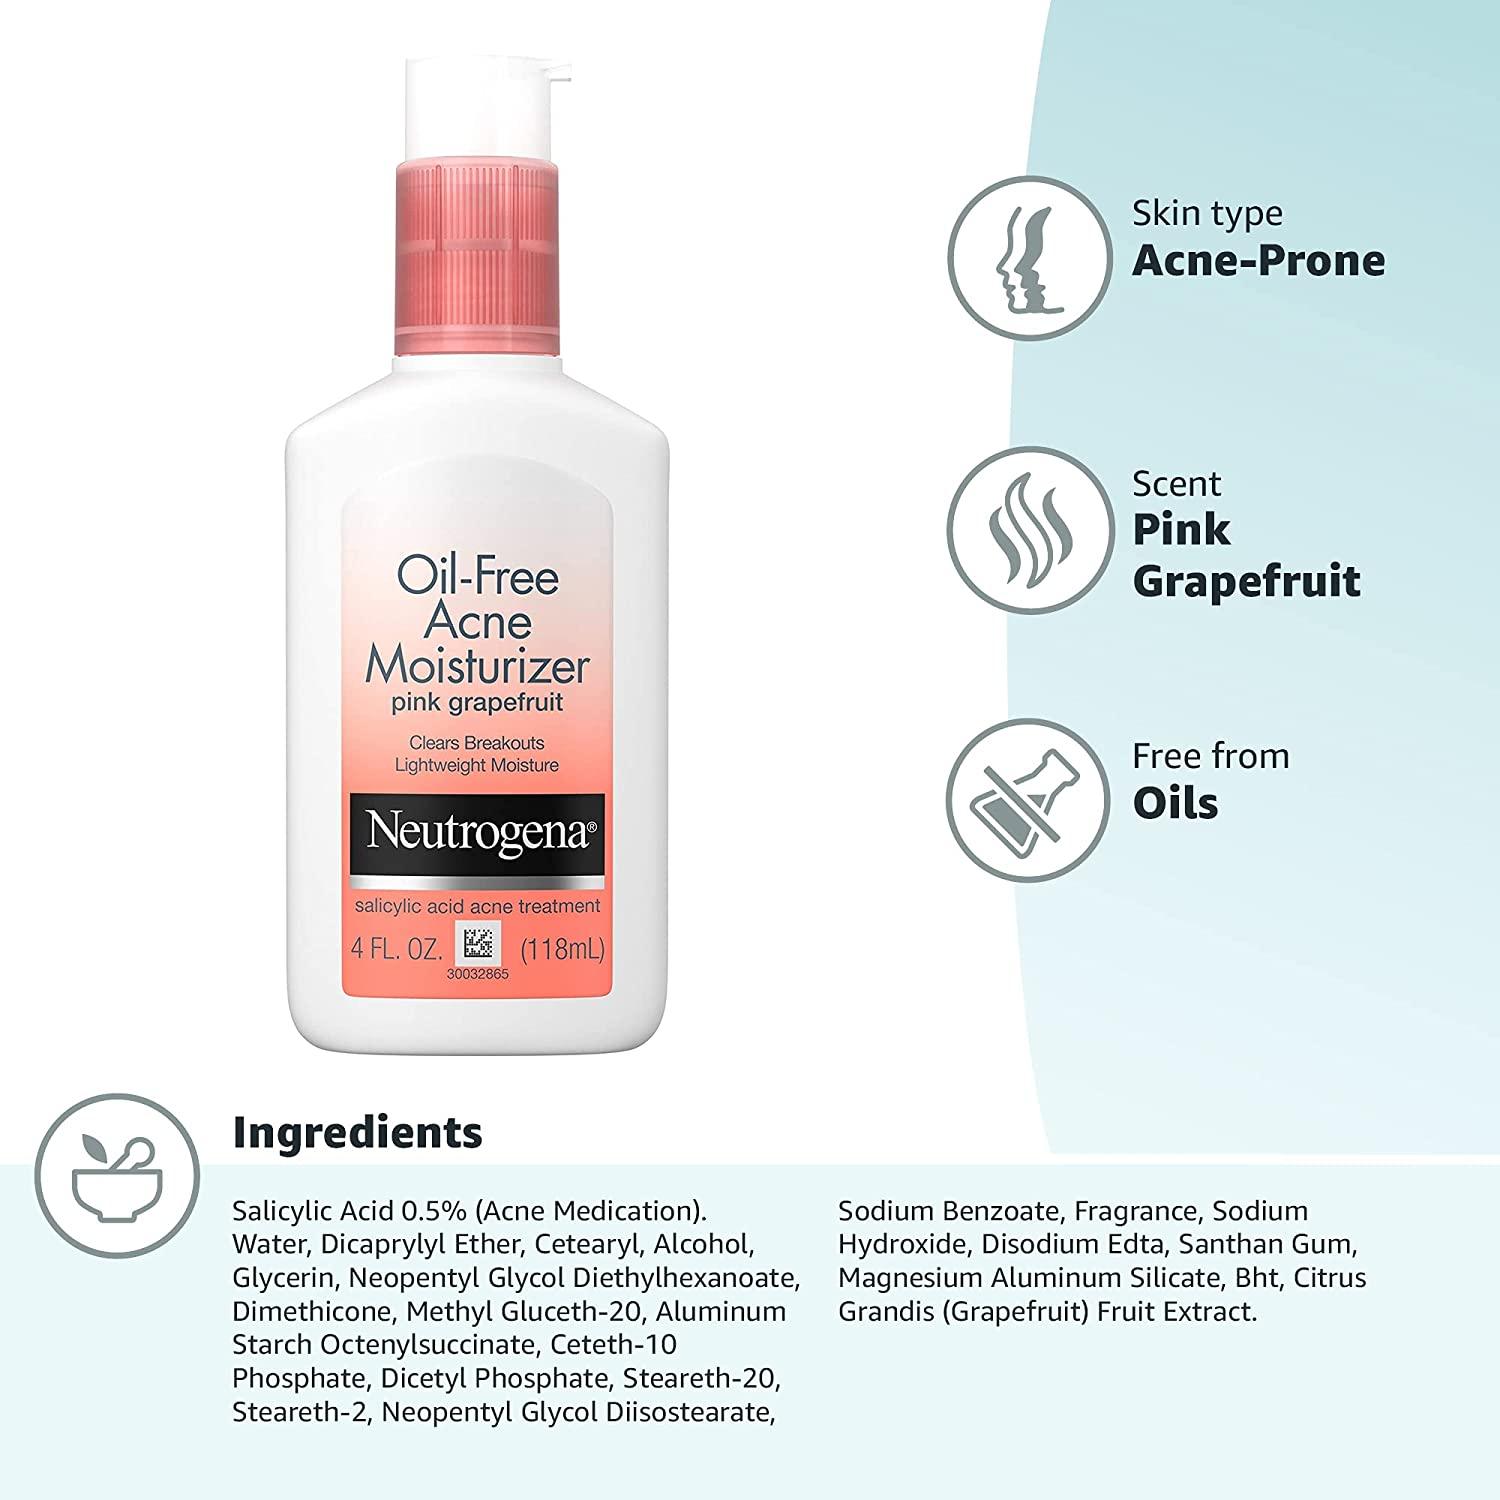 Oil Acne Facial Moisturizer with.5% Salicylic Acid Acne Treatment, Pink Grapefruit Acne Fighting Face Lotion for Breakouts, Non-Greasy & Non-Comedogenic, 4 fl. oz Pink grapefruit 4 Fl Oz (Pack of